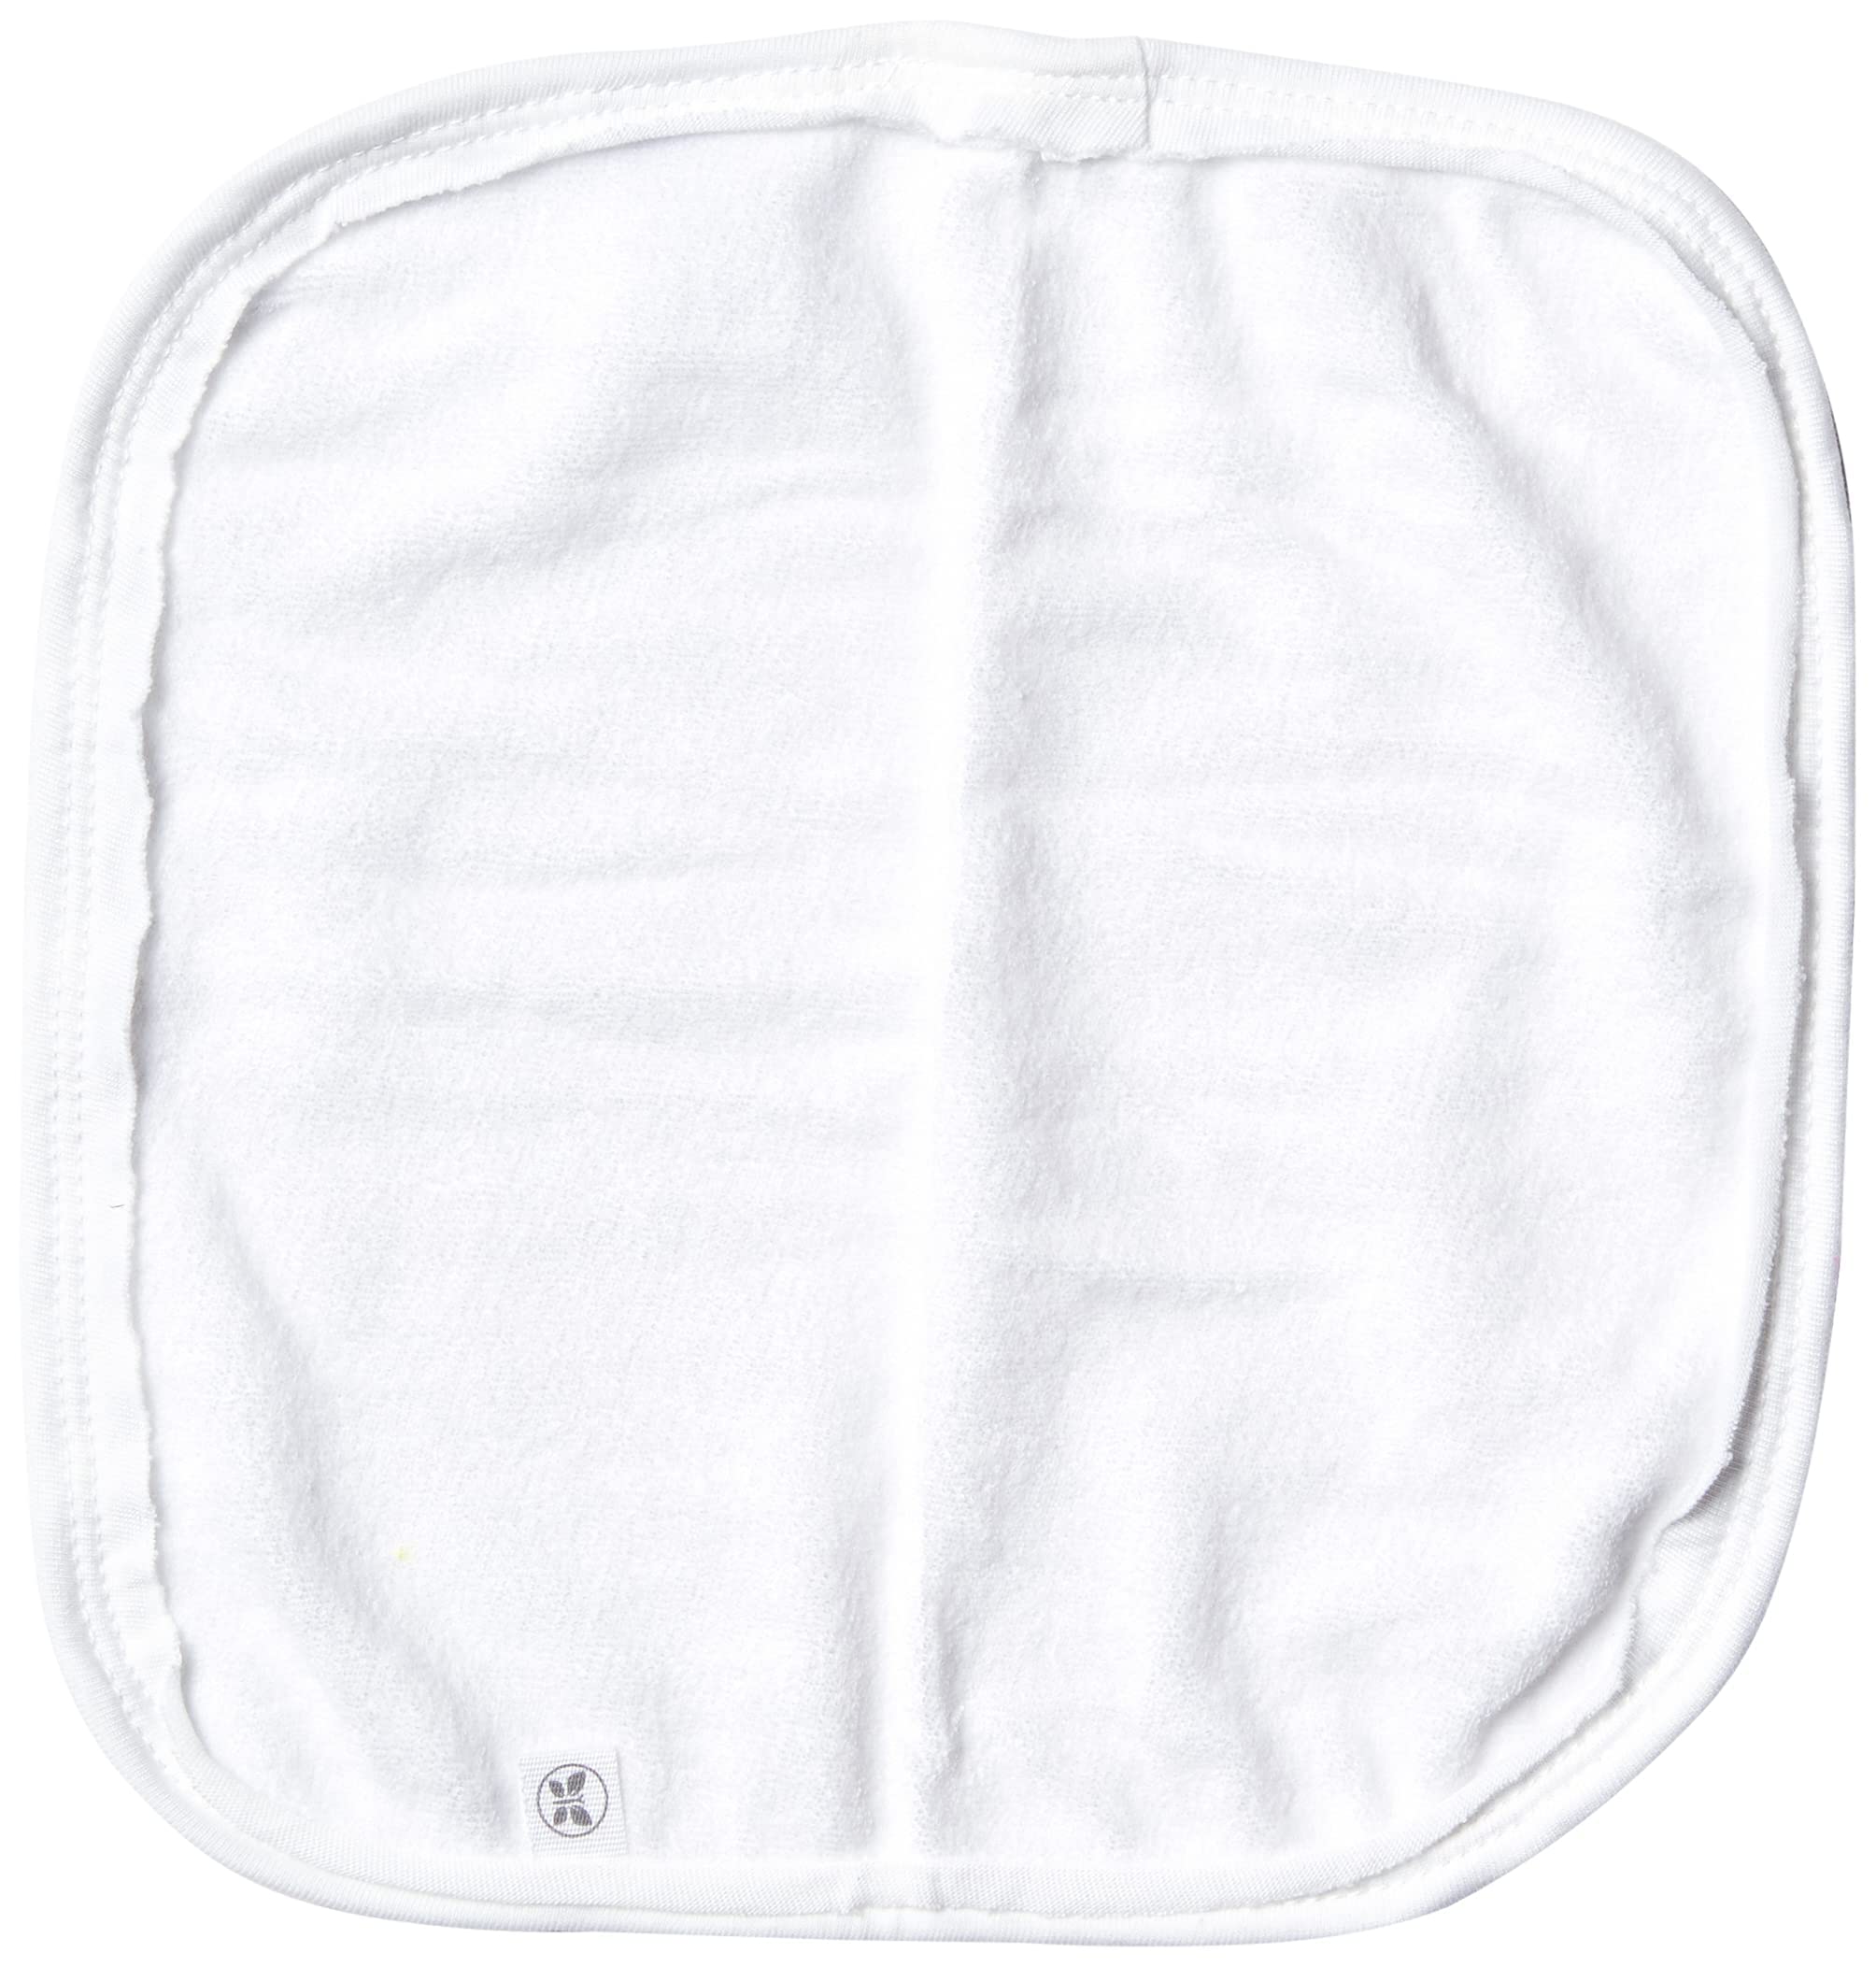 HonestBaby 10-Pack Organic Cotton Baby-Terry Wash Cloths, Bright White, One Size,10 Count (Pack of 1)